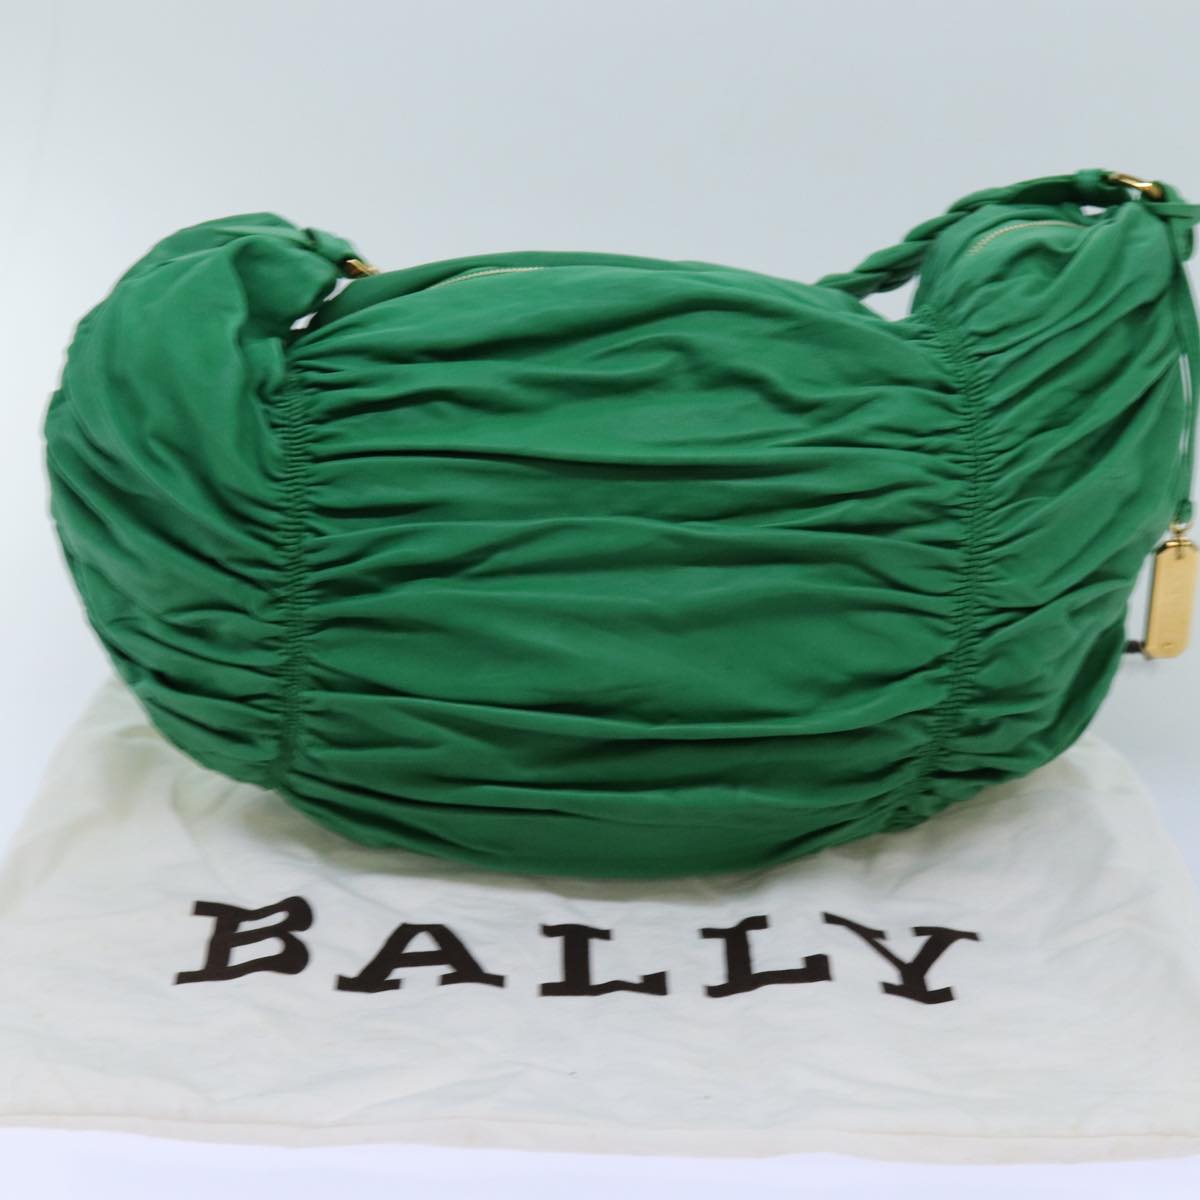 BALLY Shoulder Bag Leather Green Auth 72551